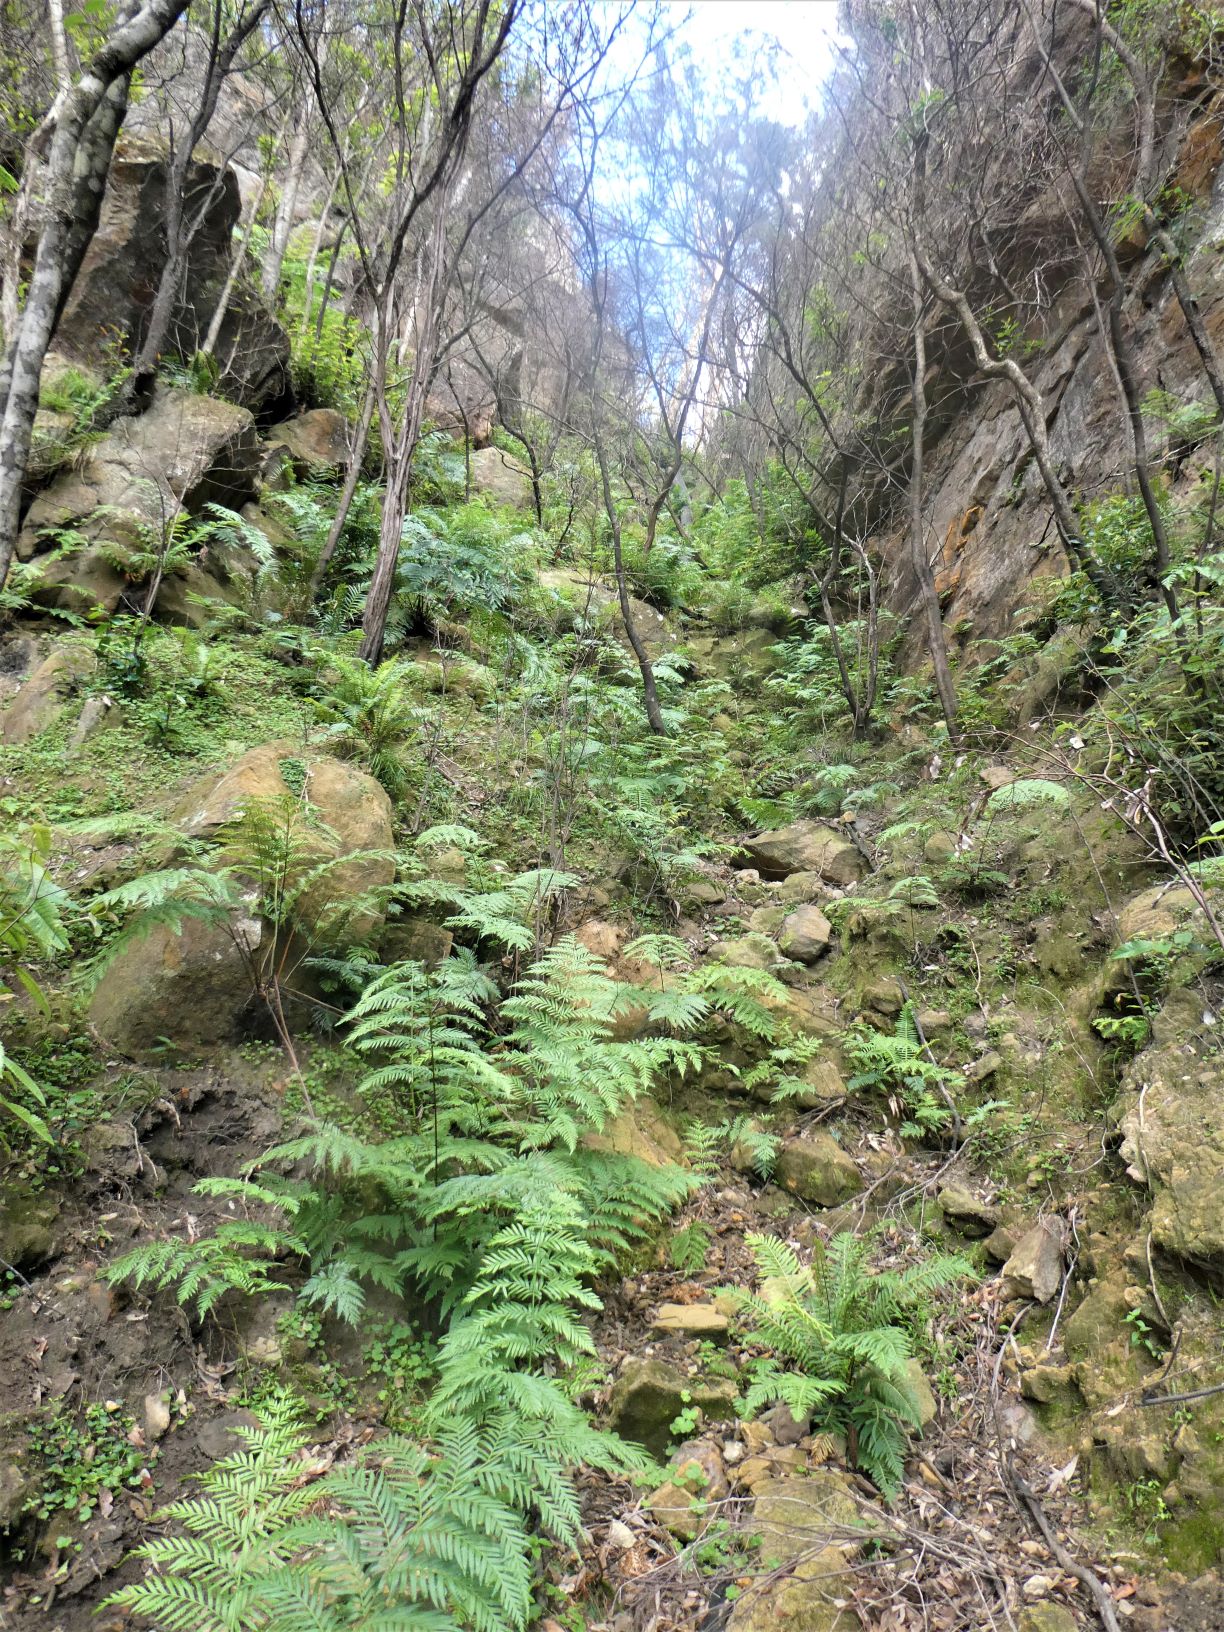 Looking back up the first gully